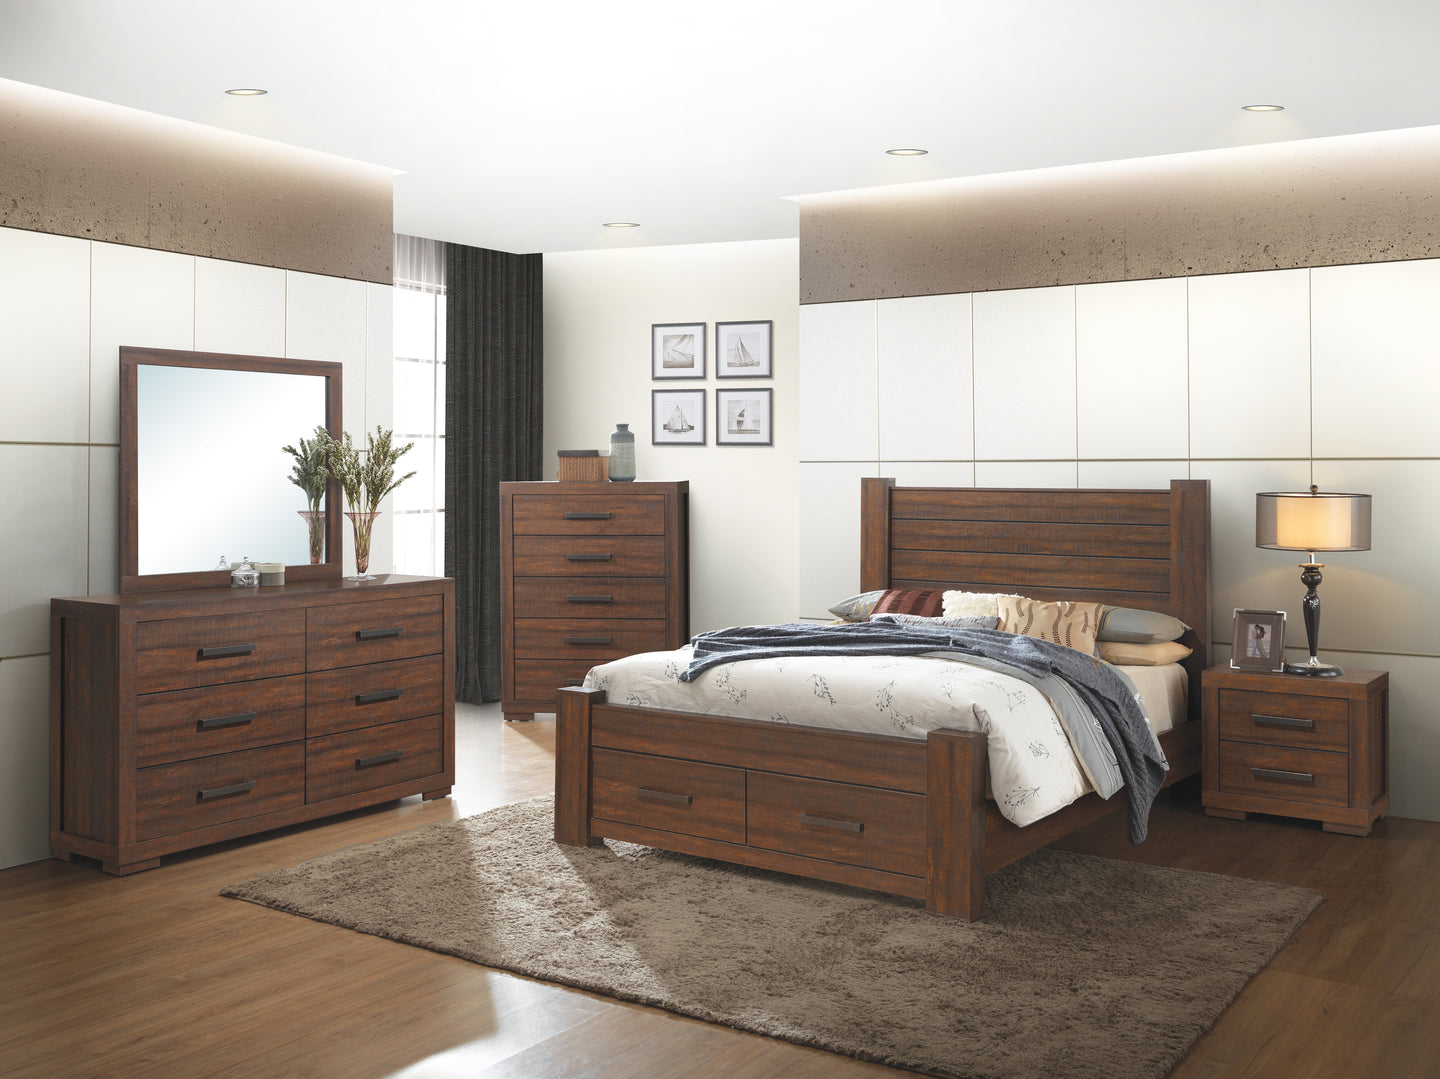 Traditional Style Bedroom In A Dark Brown Finish